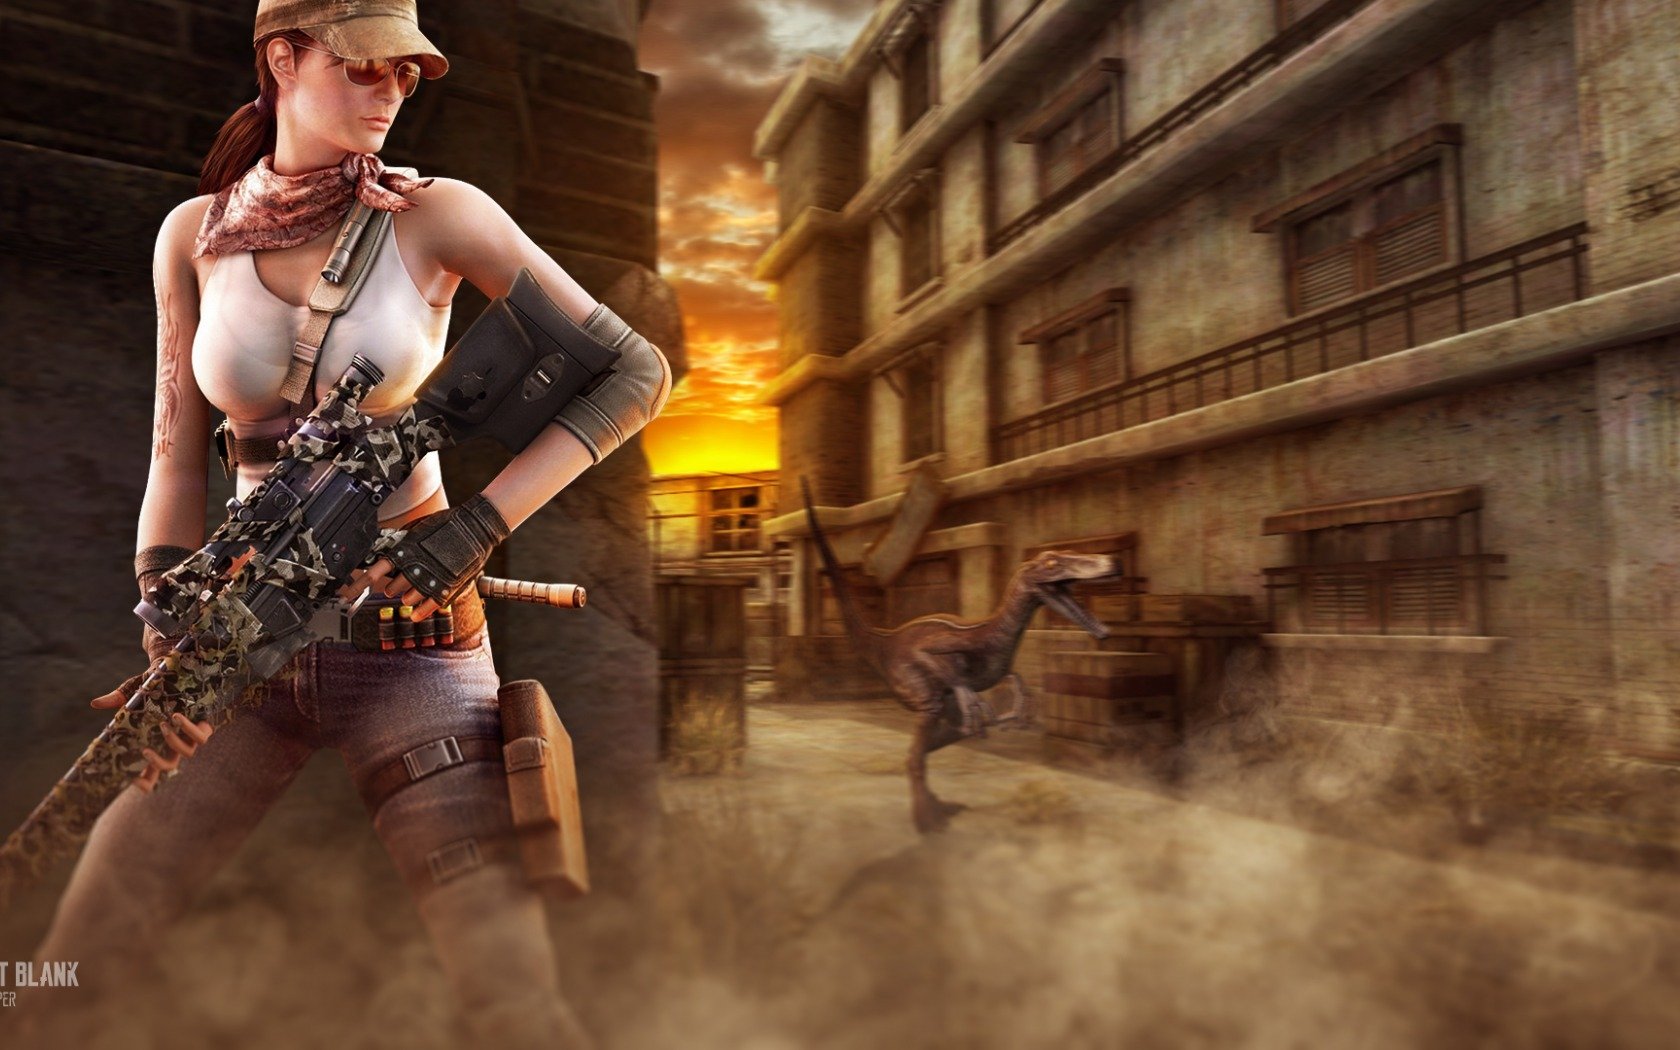 point, Blank, Online, Shooter, Action, Fighting, Stealth, Tactical, 1pblank, Fps, Mmo, Warrior, Weapon, Gun Wallpaper